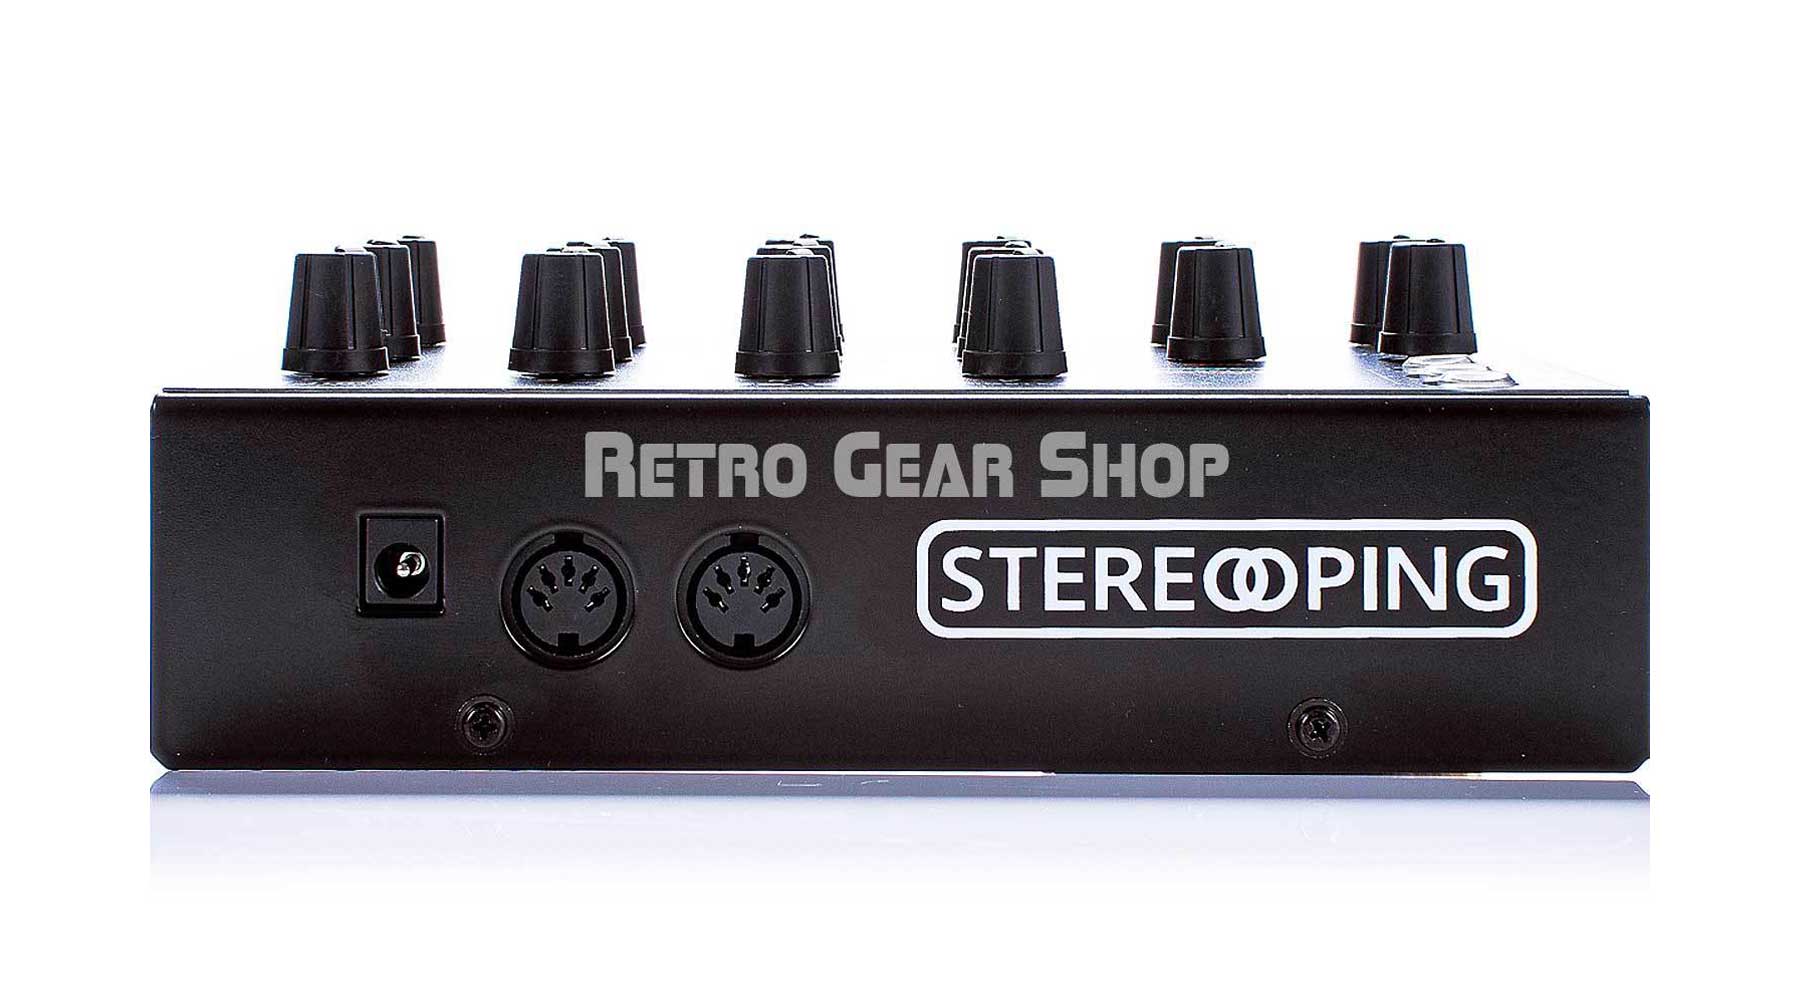 Stereoping CE1 Midi Synthesizer AX70VX90 Rear